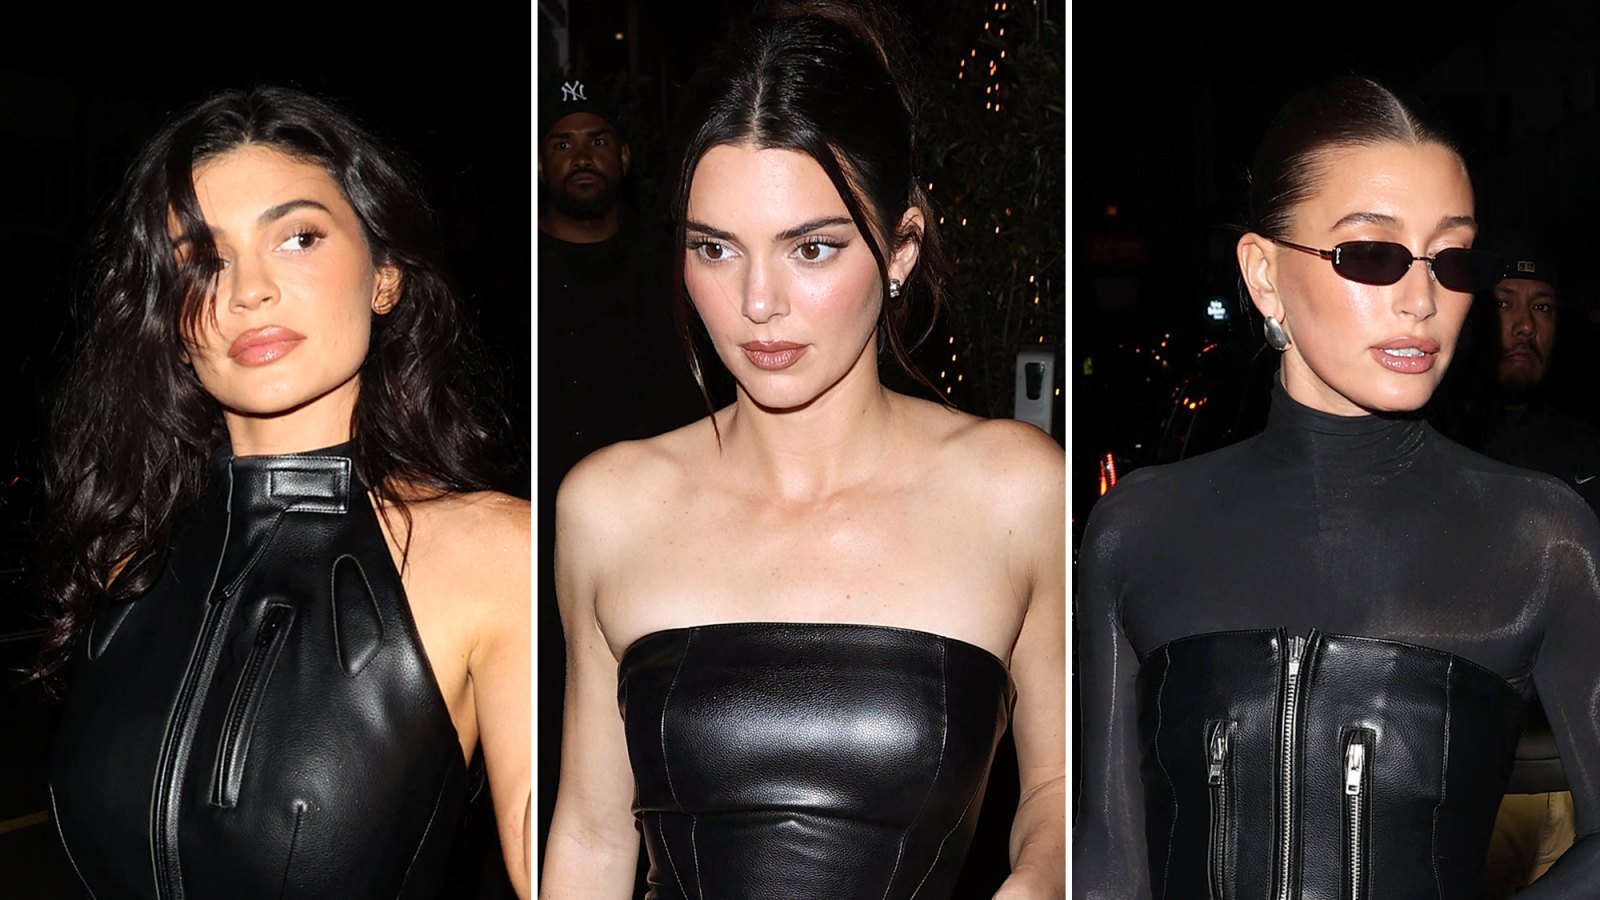 https://www.usmagazine.com/wp-content/uploads/2023/10/Kylie-Jenner-Kendall-Jenner-Hailey-Bieber-Coordinate-in-All-Black-for-Khy-Dinner-Feature.jpg?crop=0px%2C0px%2C2000px%2C1131px&resize=1600%2C900&quality=86&strip=all